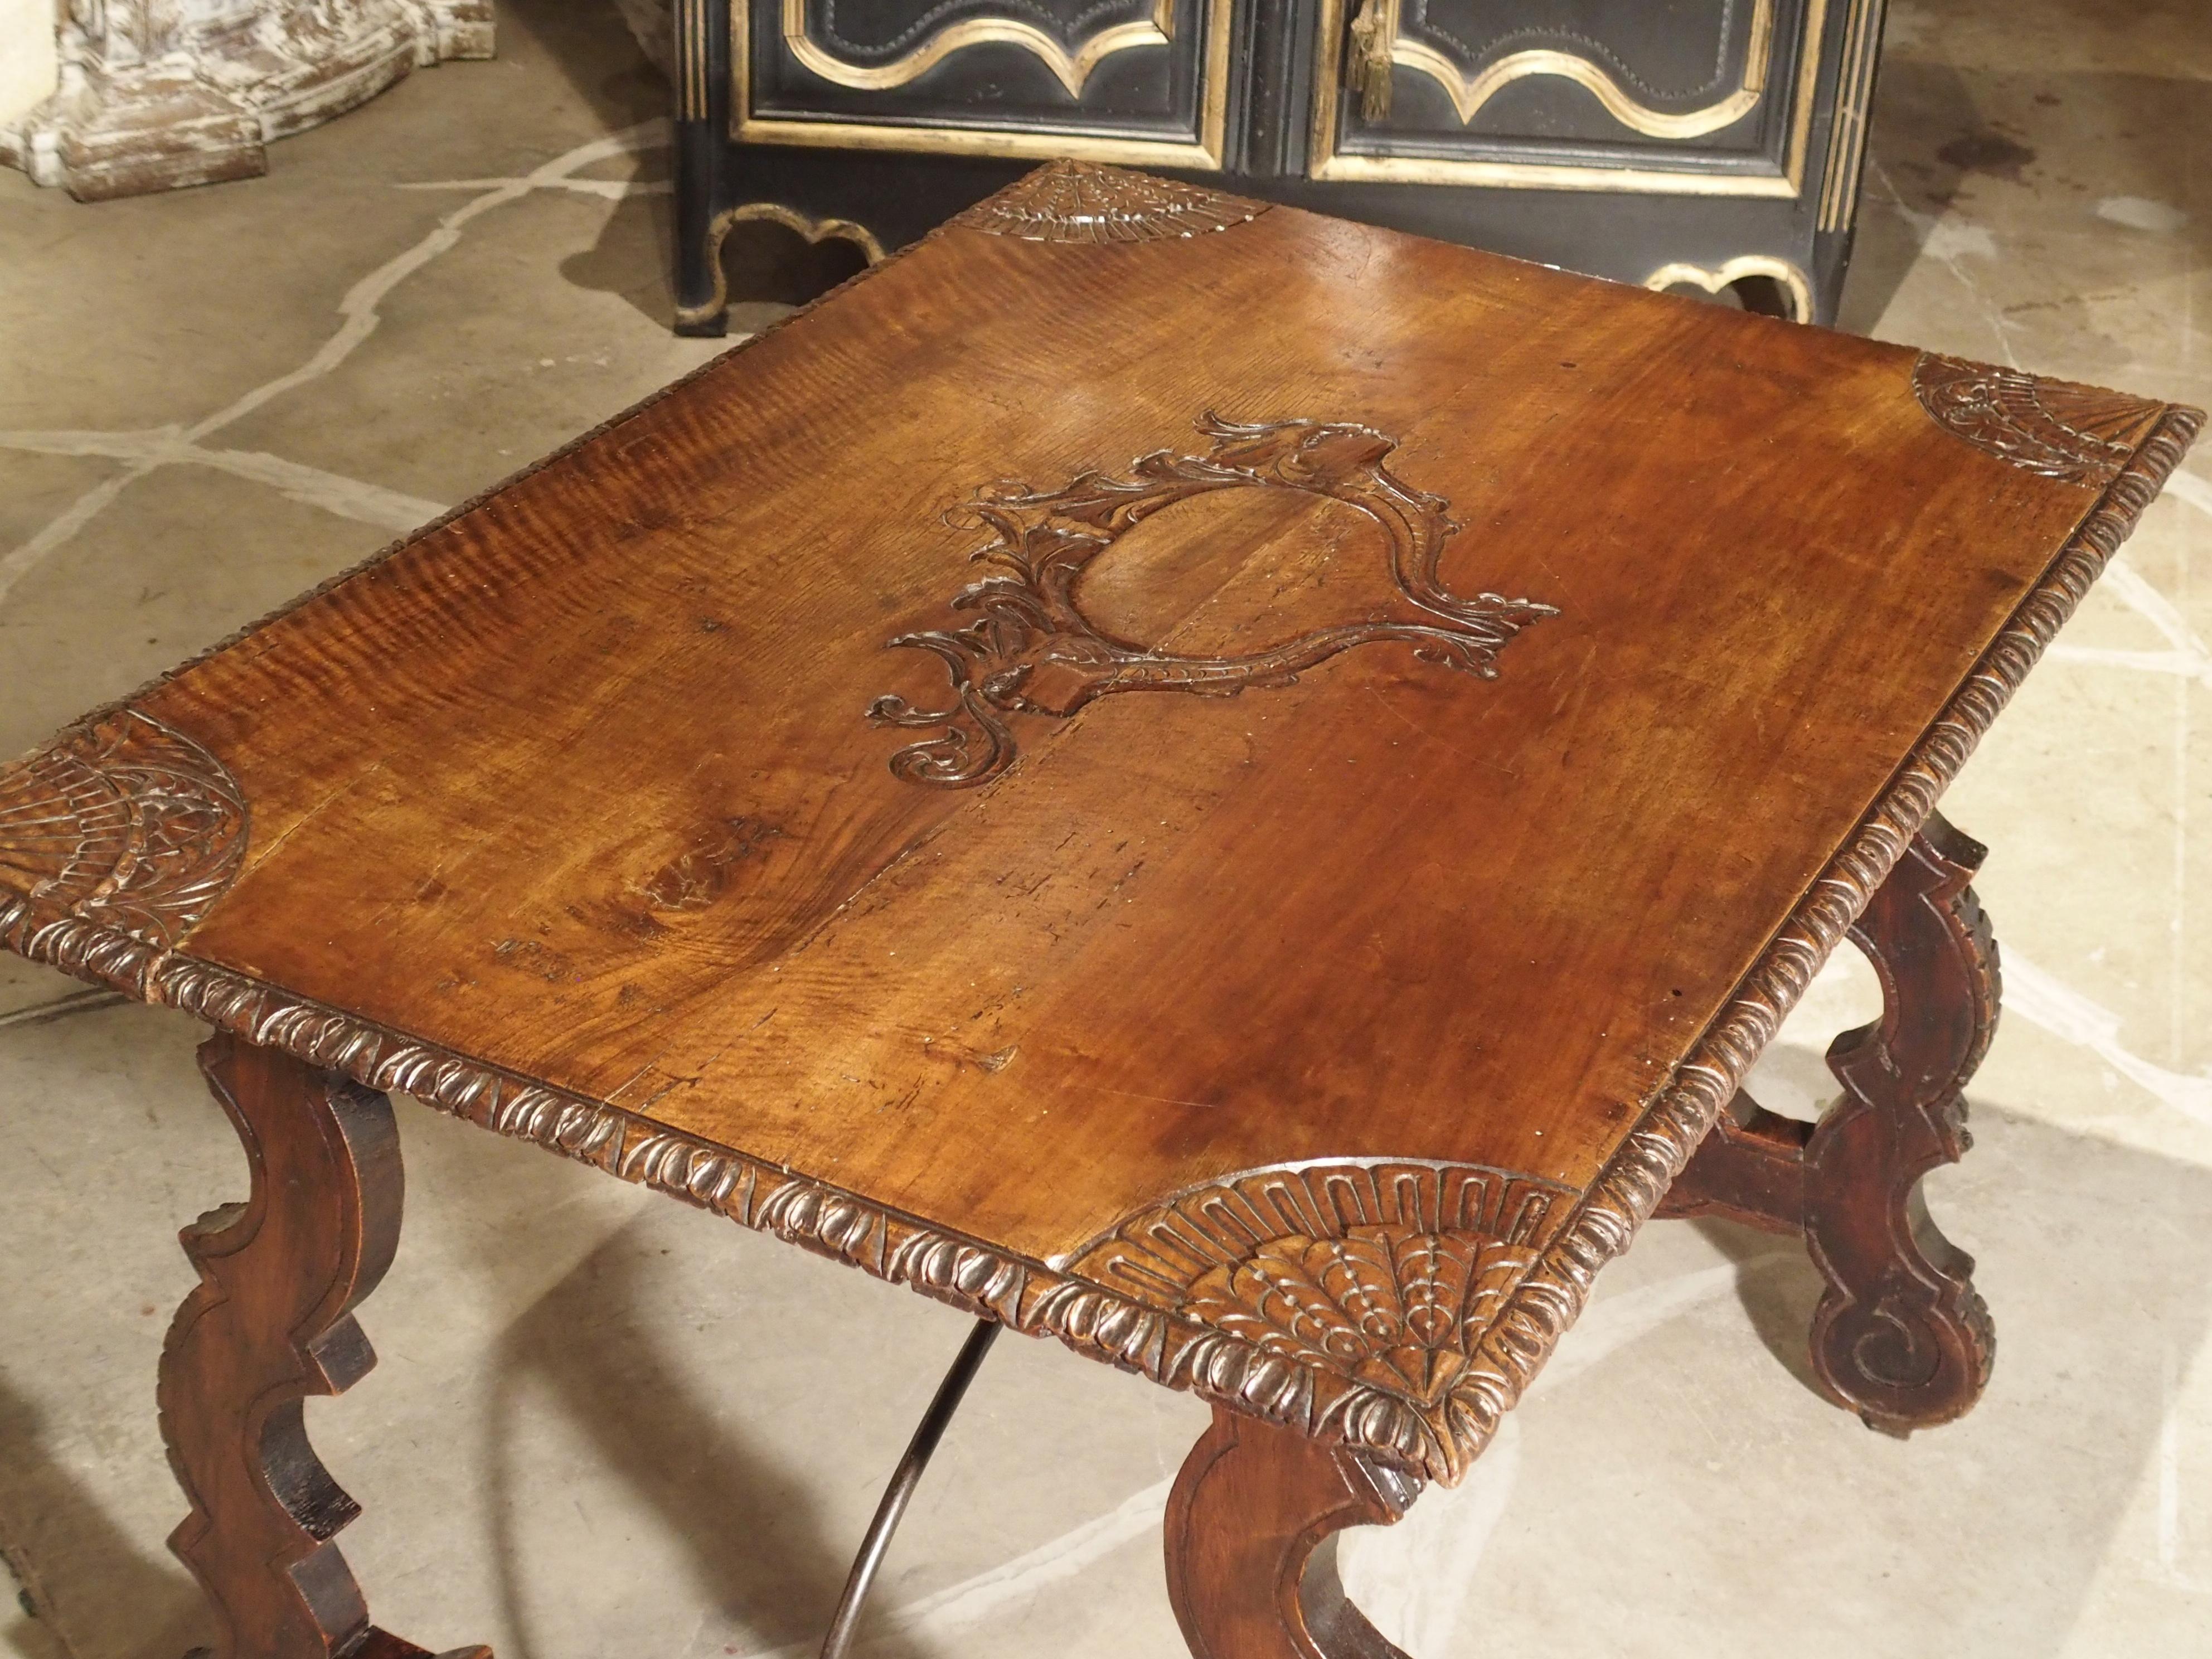 This incredibly unique Catalan table from the 1700s has exquisite motifs carved into its top walnut wood planks. At the center of the table is stylized cartouche with foliate motifs and two demi-figures flanking each side. At each of its four